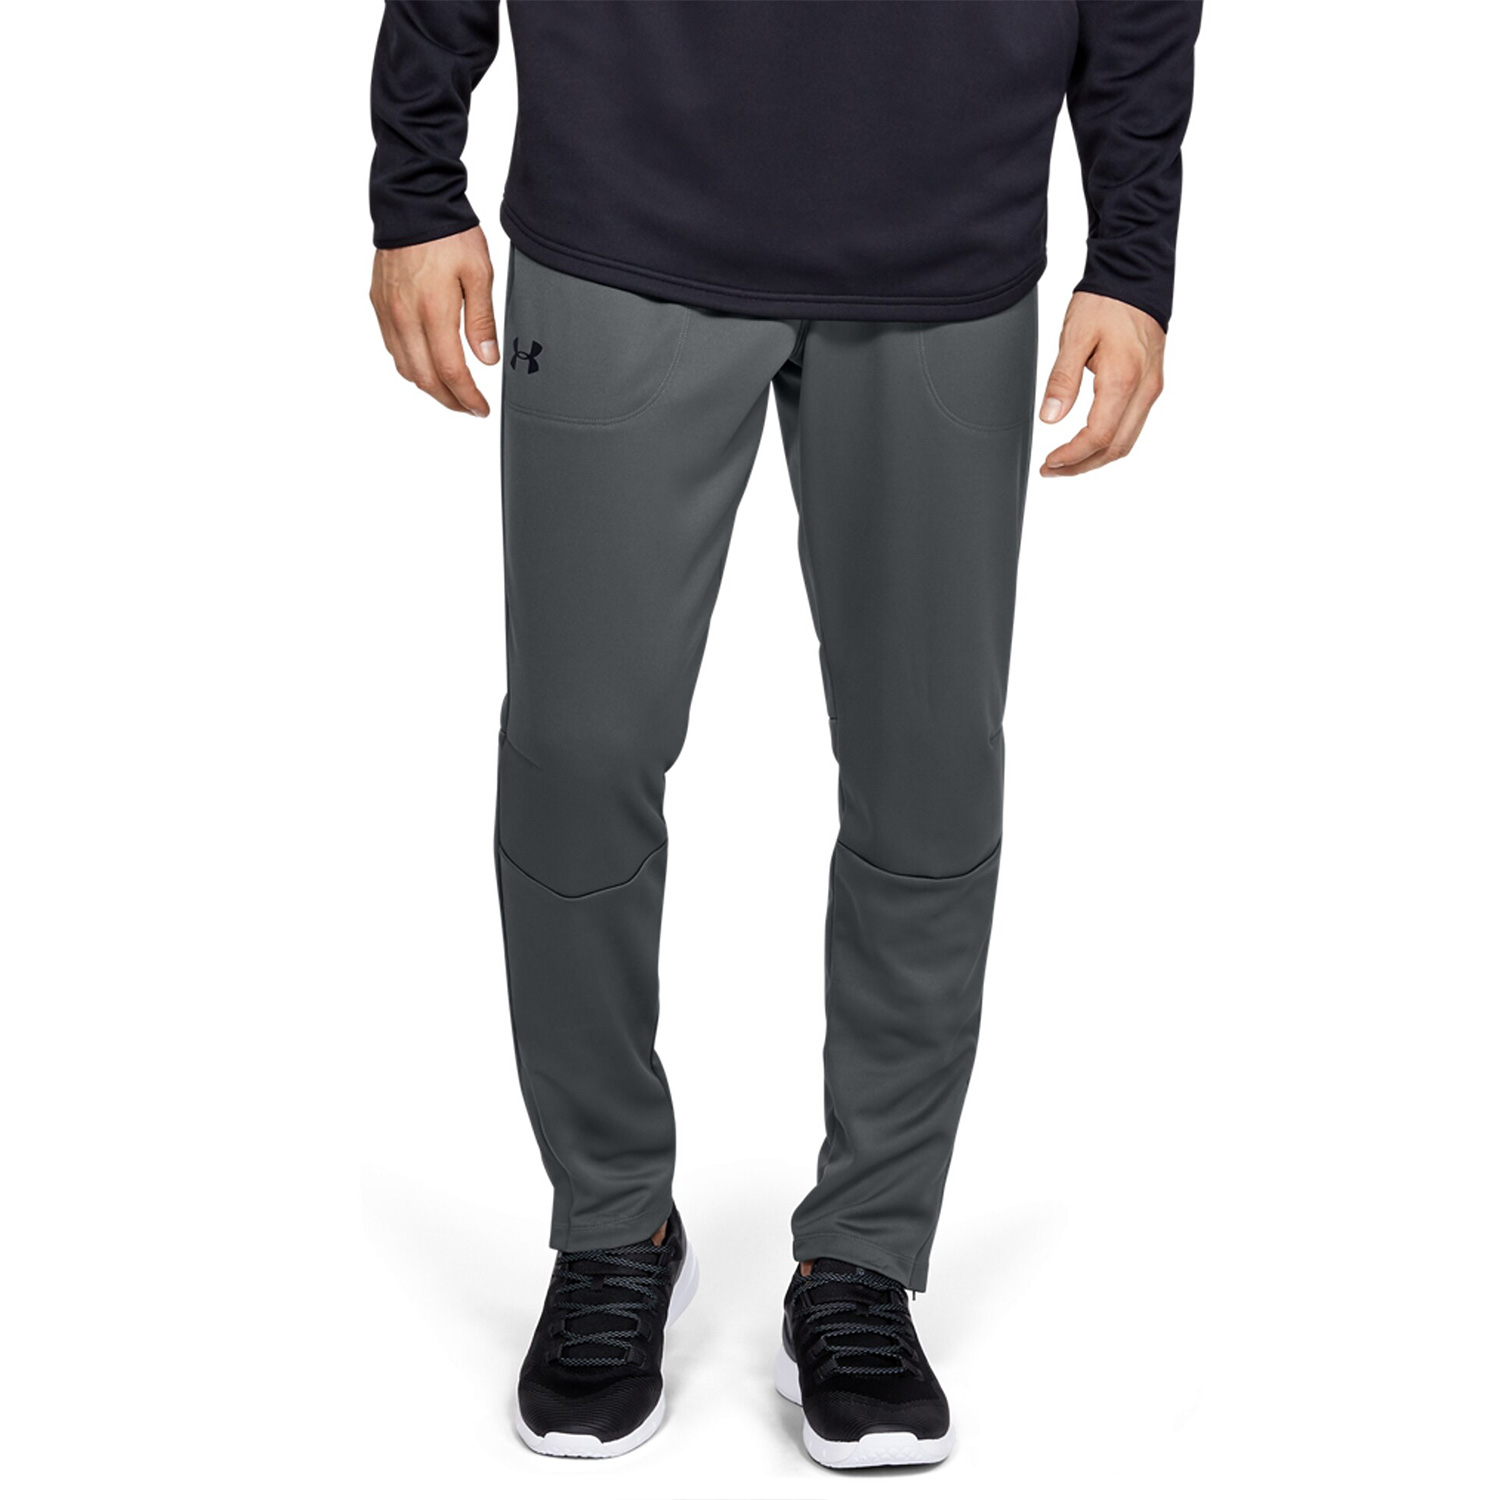 gray under armour pants